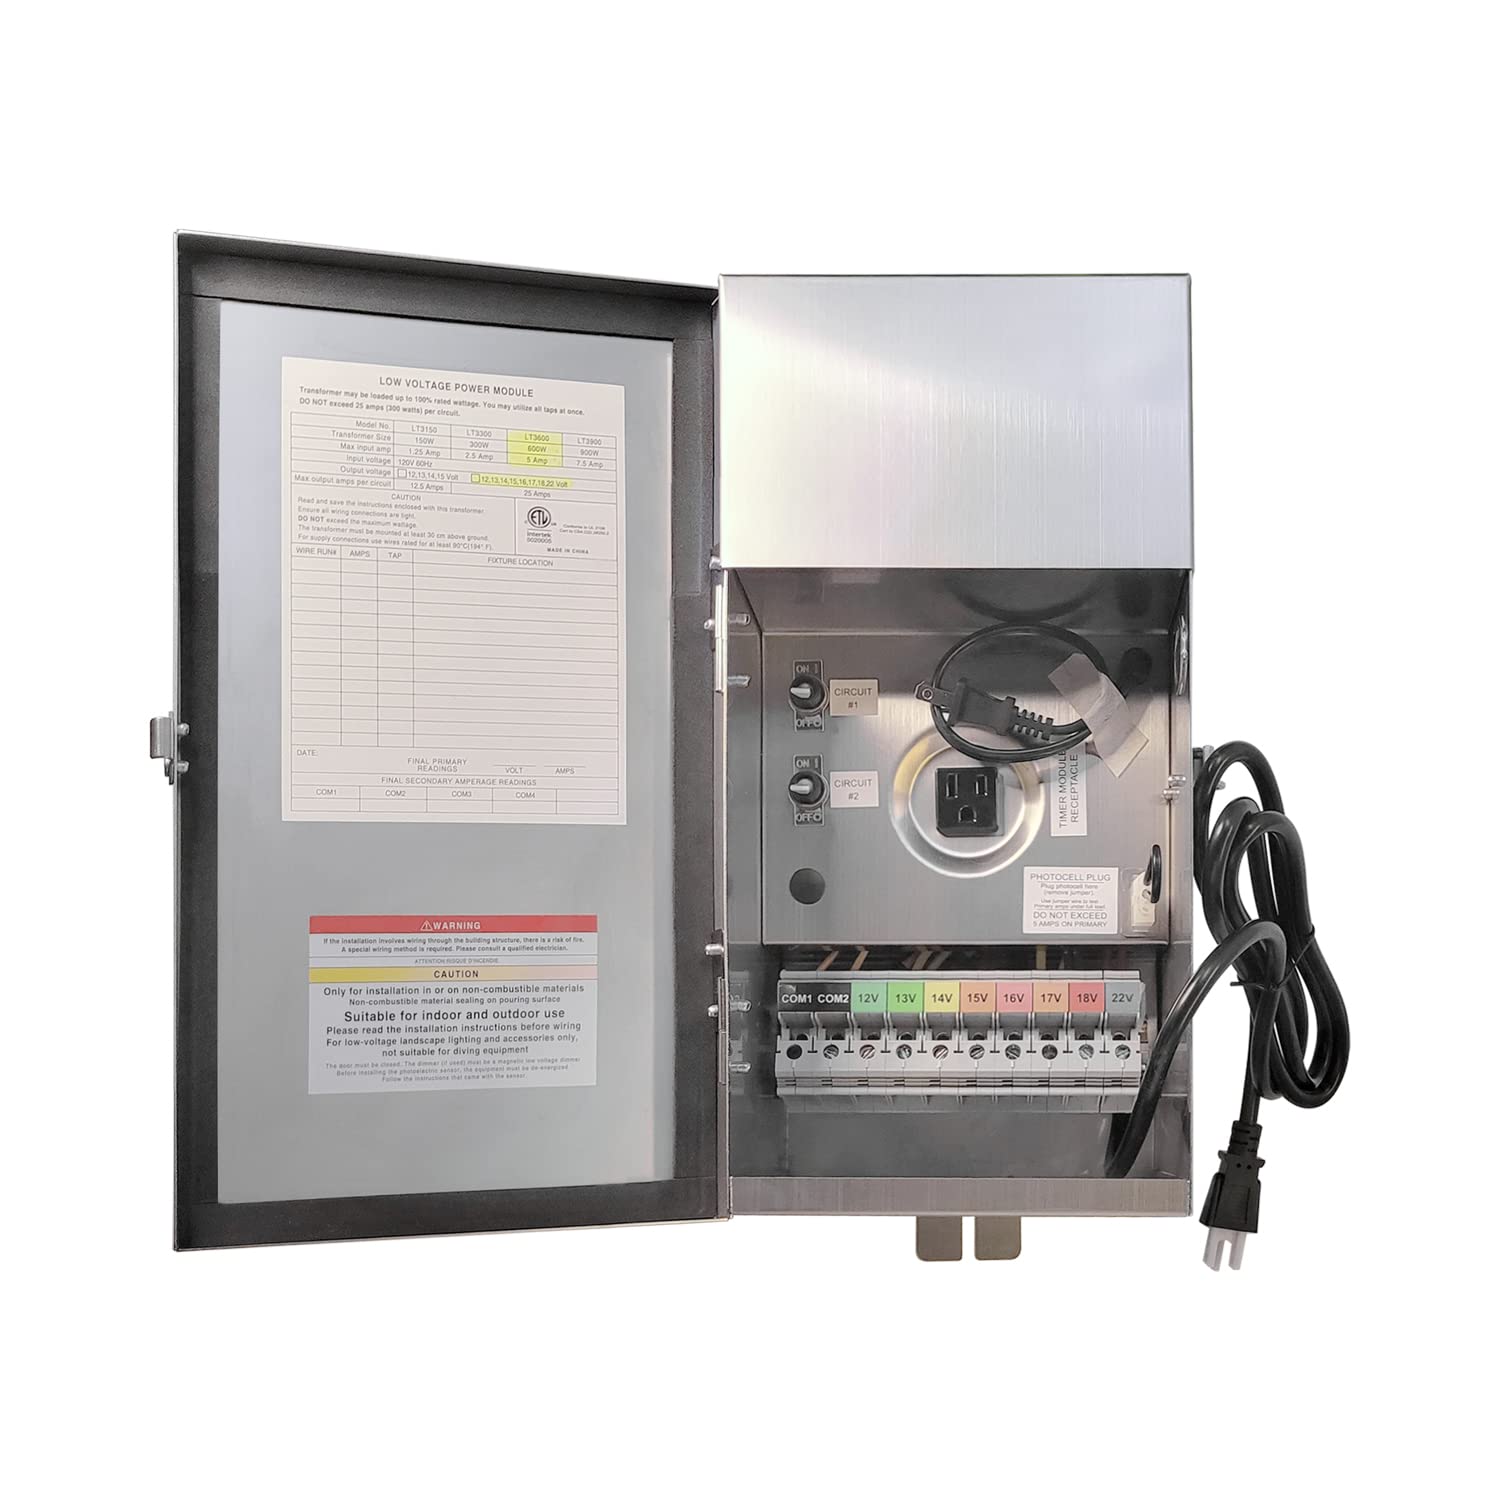 600W multi-tap low voltage transformer for outdoor landscape lighting, model COT703S with voltage options and timer display.